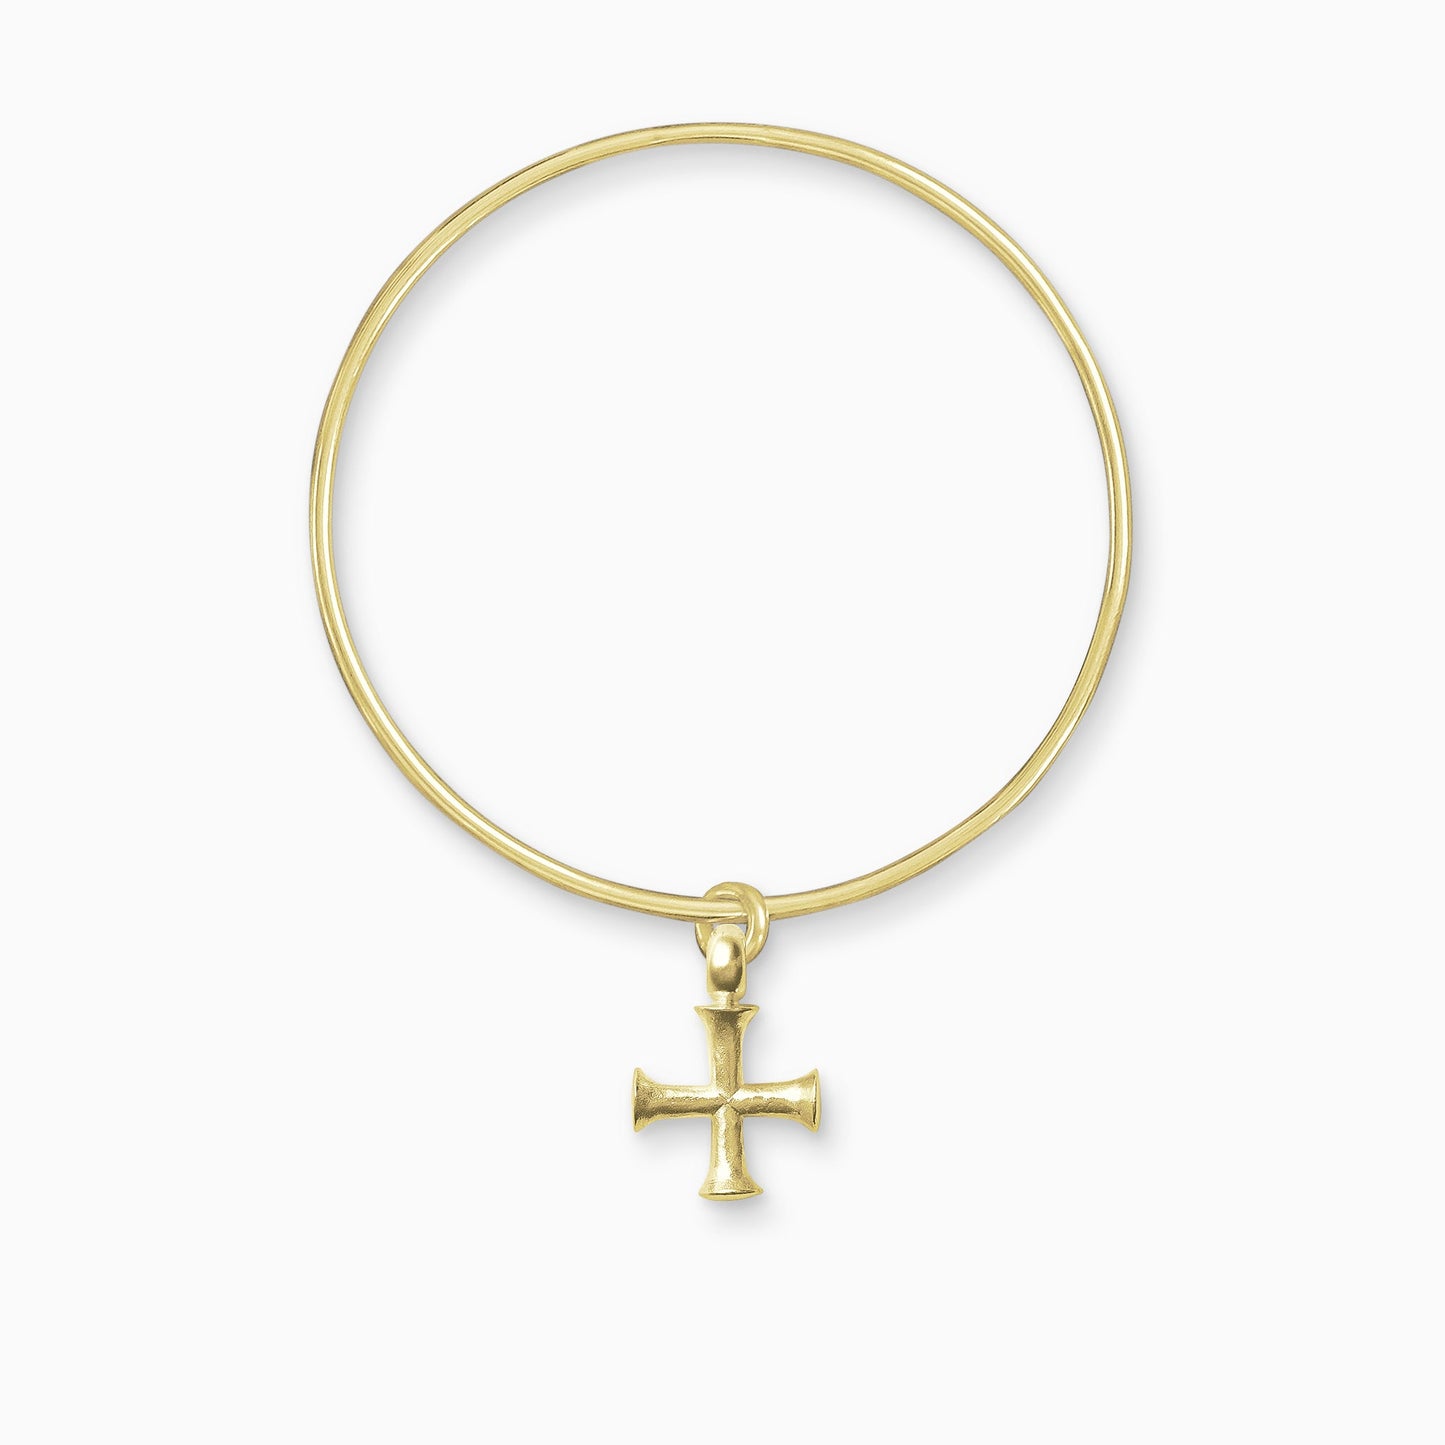 An 18ct Fairtrade yellow gold geometric cross charm freely moving on a round wire bangle. The cross has equal length arms with outward spreading ends.  Charm 25mm. Bangle, 63mm inside diameter x 2mm round wire.